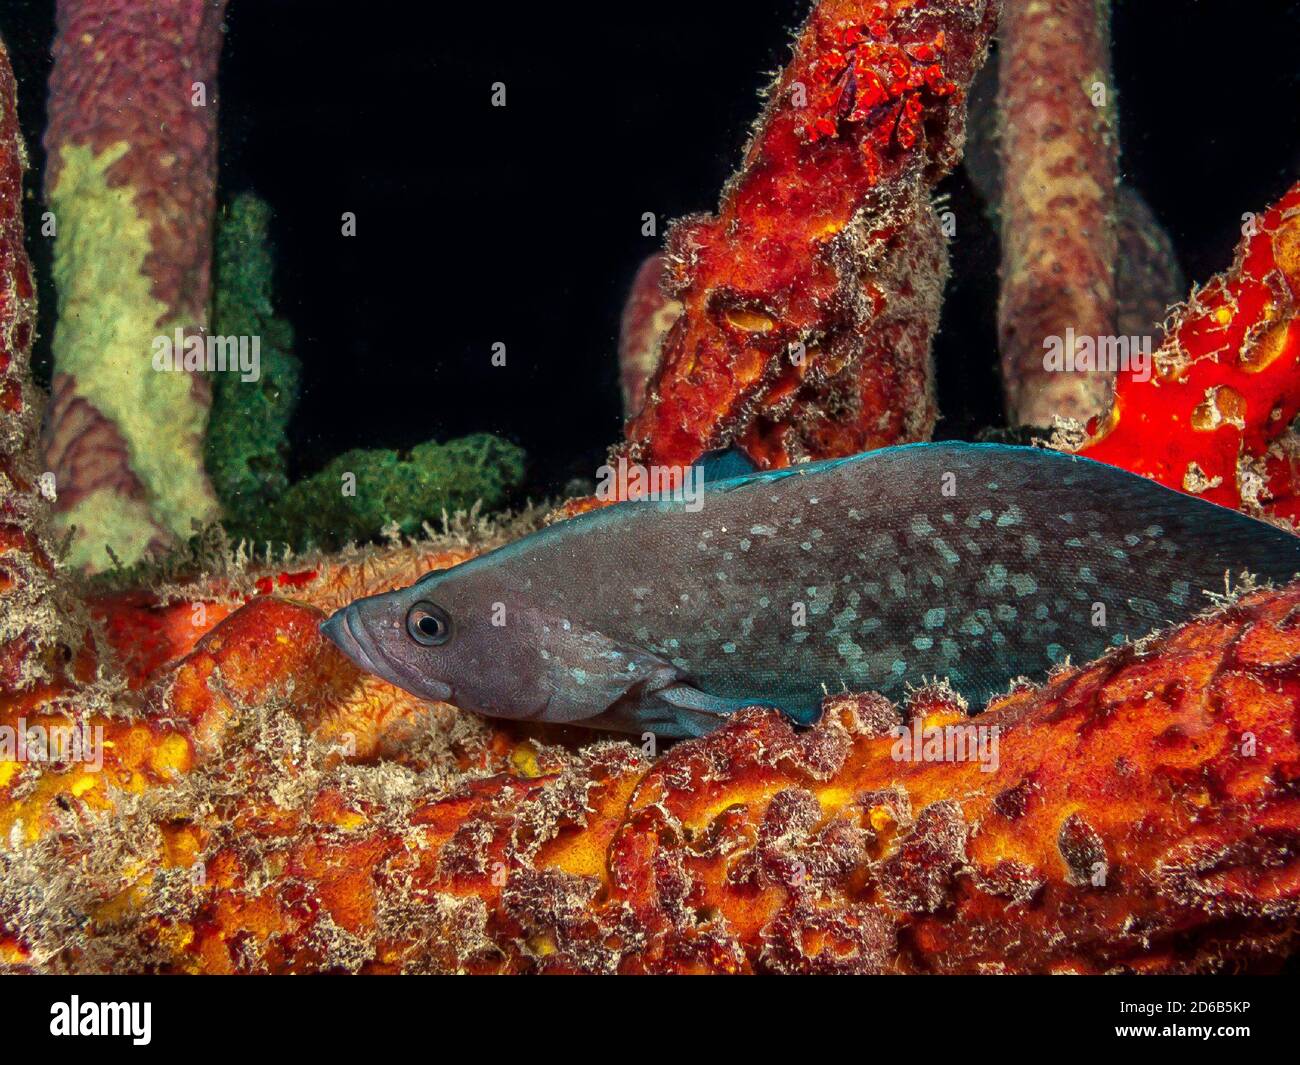 Rypticus is a genus of marine ray-finned fish, related to the groupers and classified within the subfamily Epinephelinae of the family Serranidae. soa Stock Photo